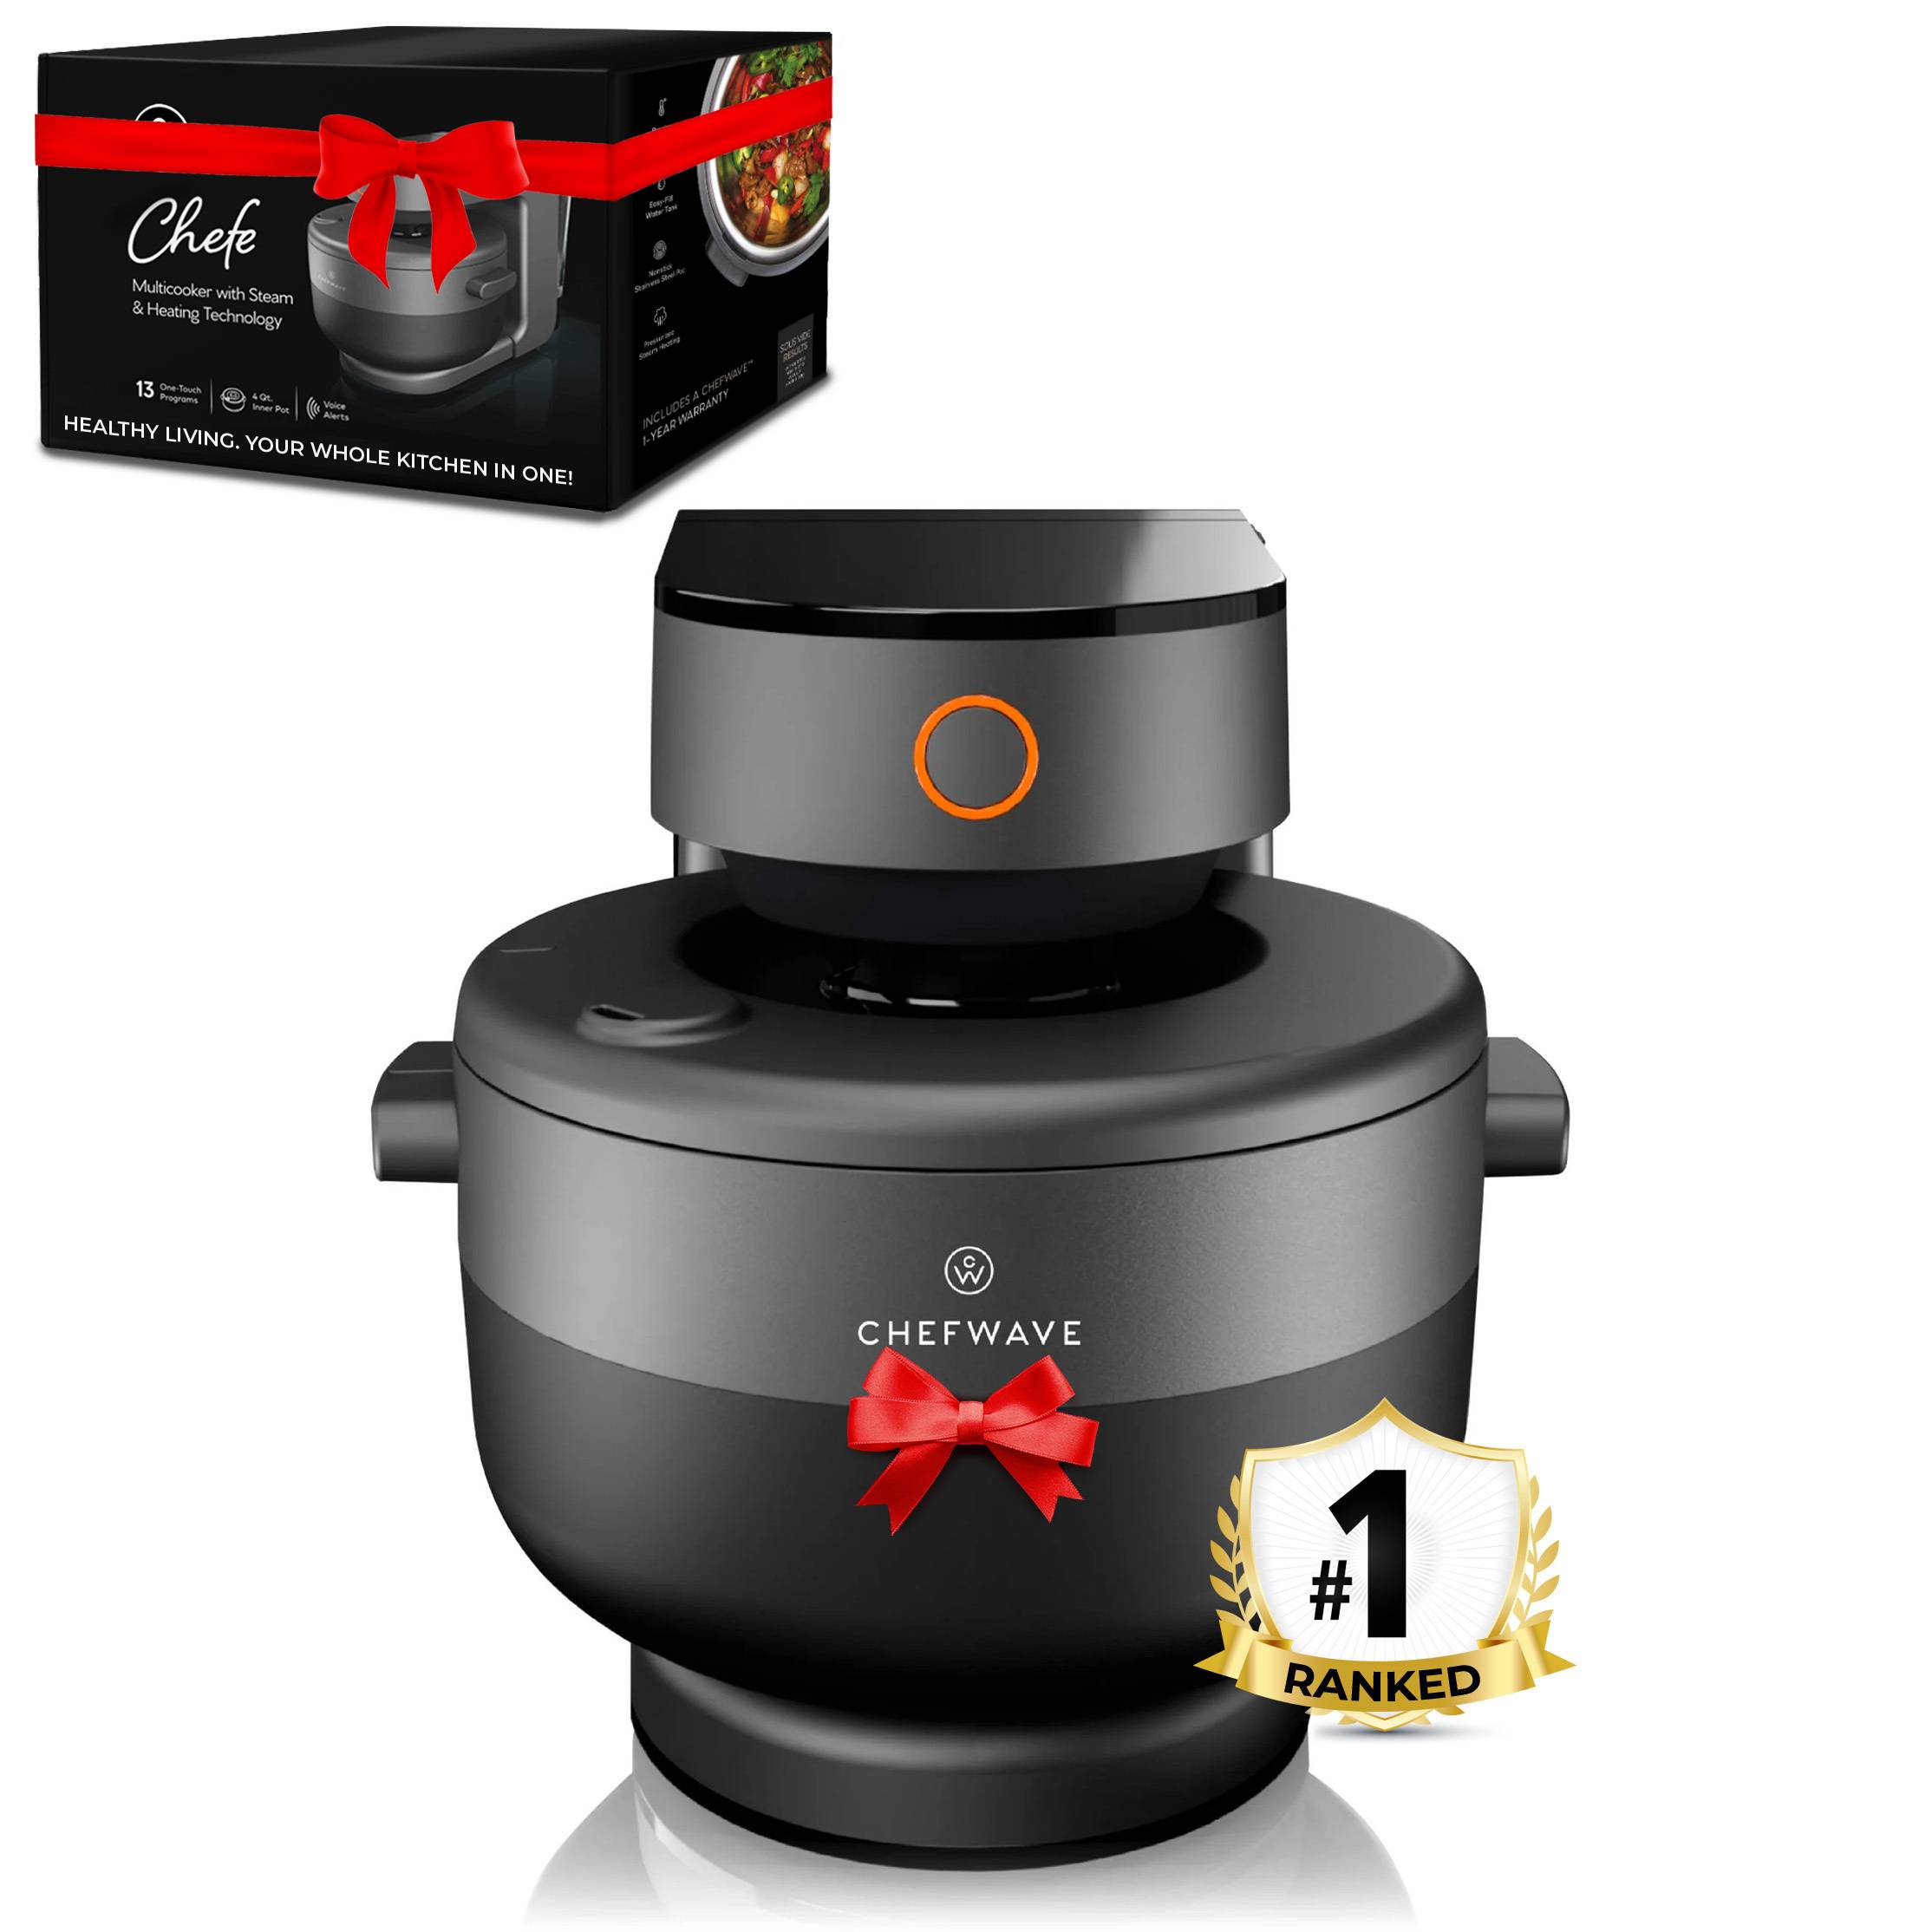 ChefWave Chefe 4Qt.13-in-1 Multicooker with 360 Induction Heating & Voice Alerts